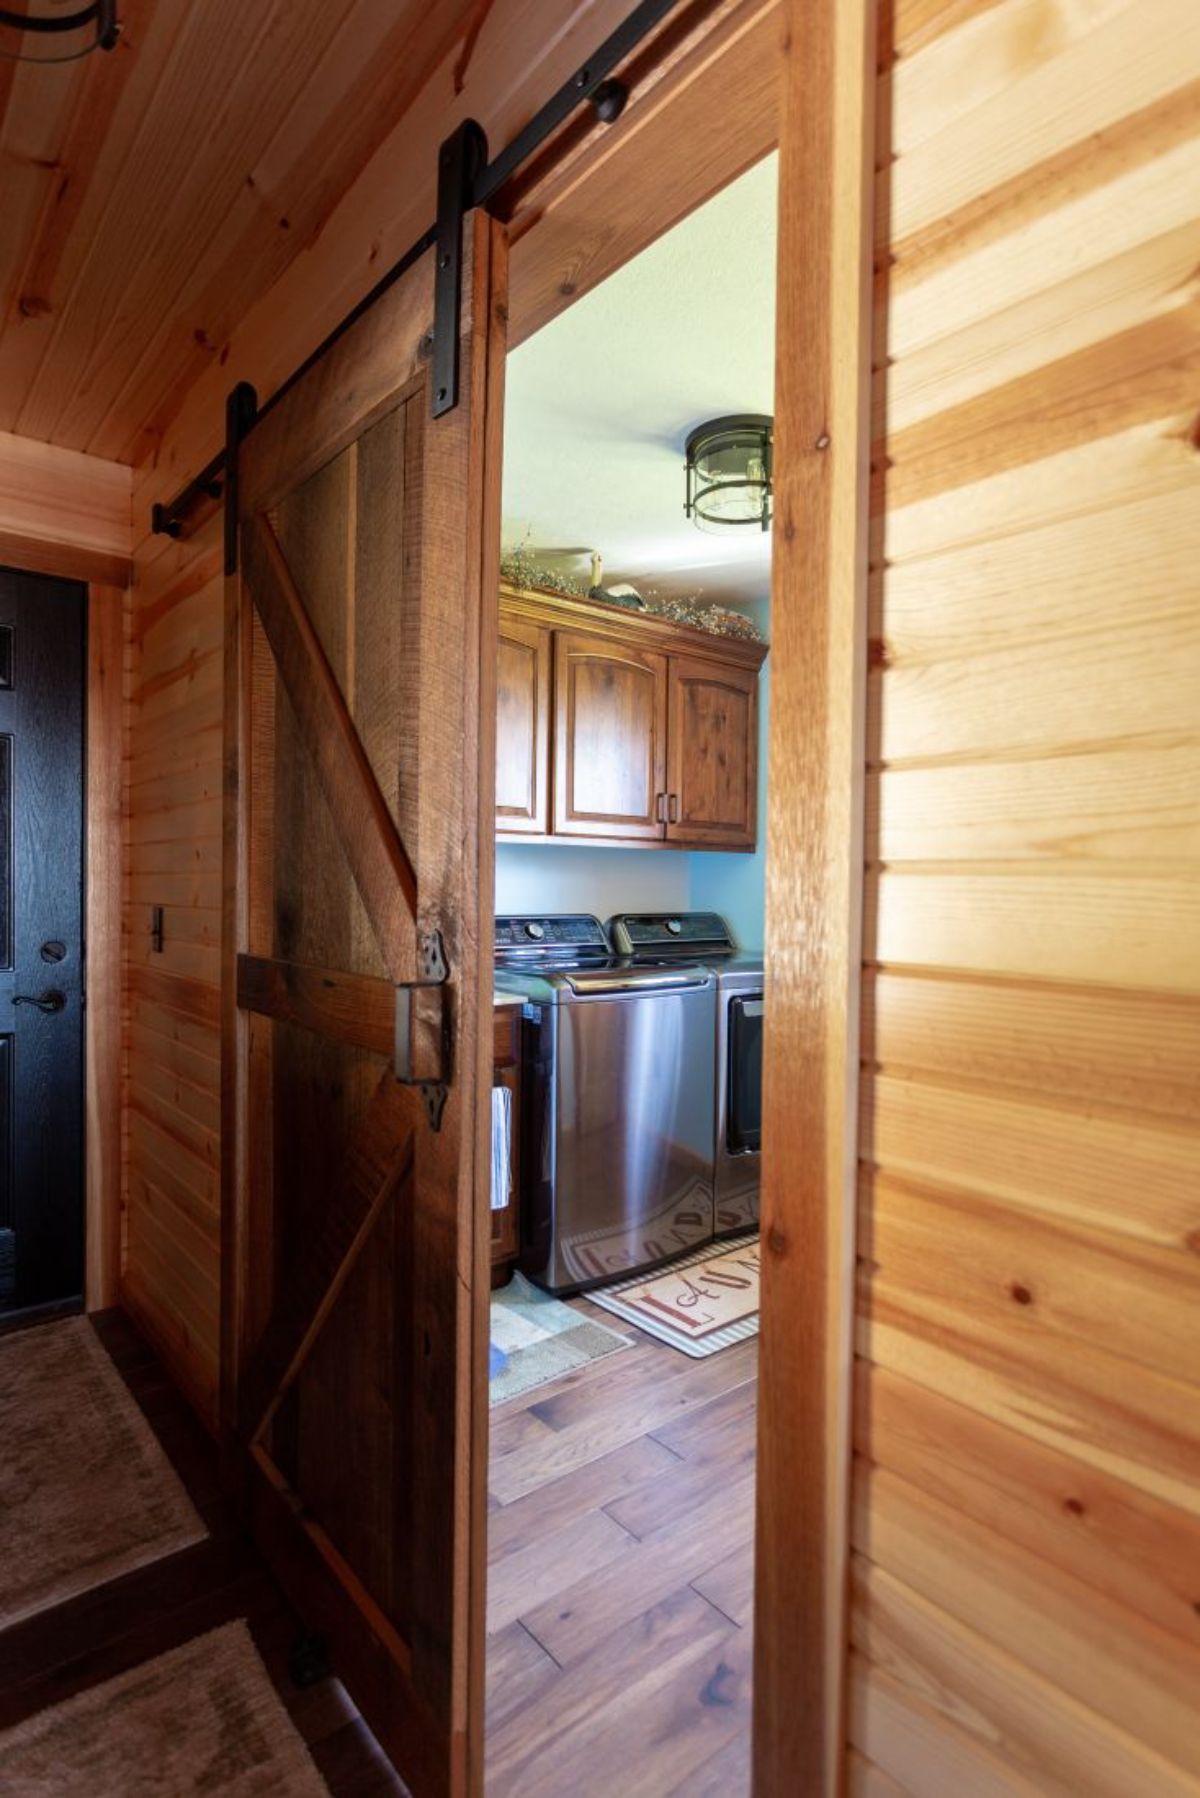 open barn door into laundry room with stainless steel laundry units